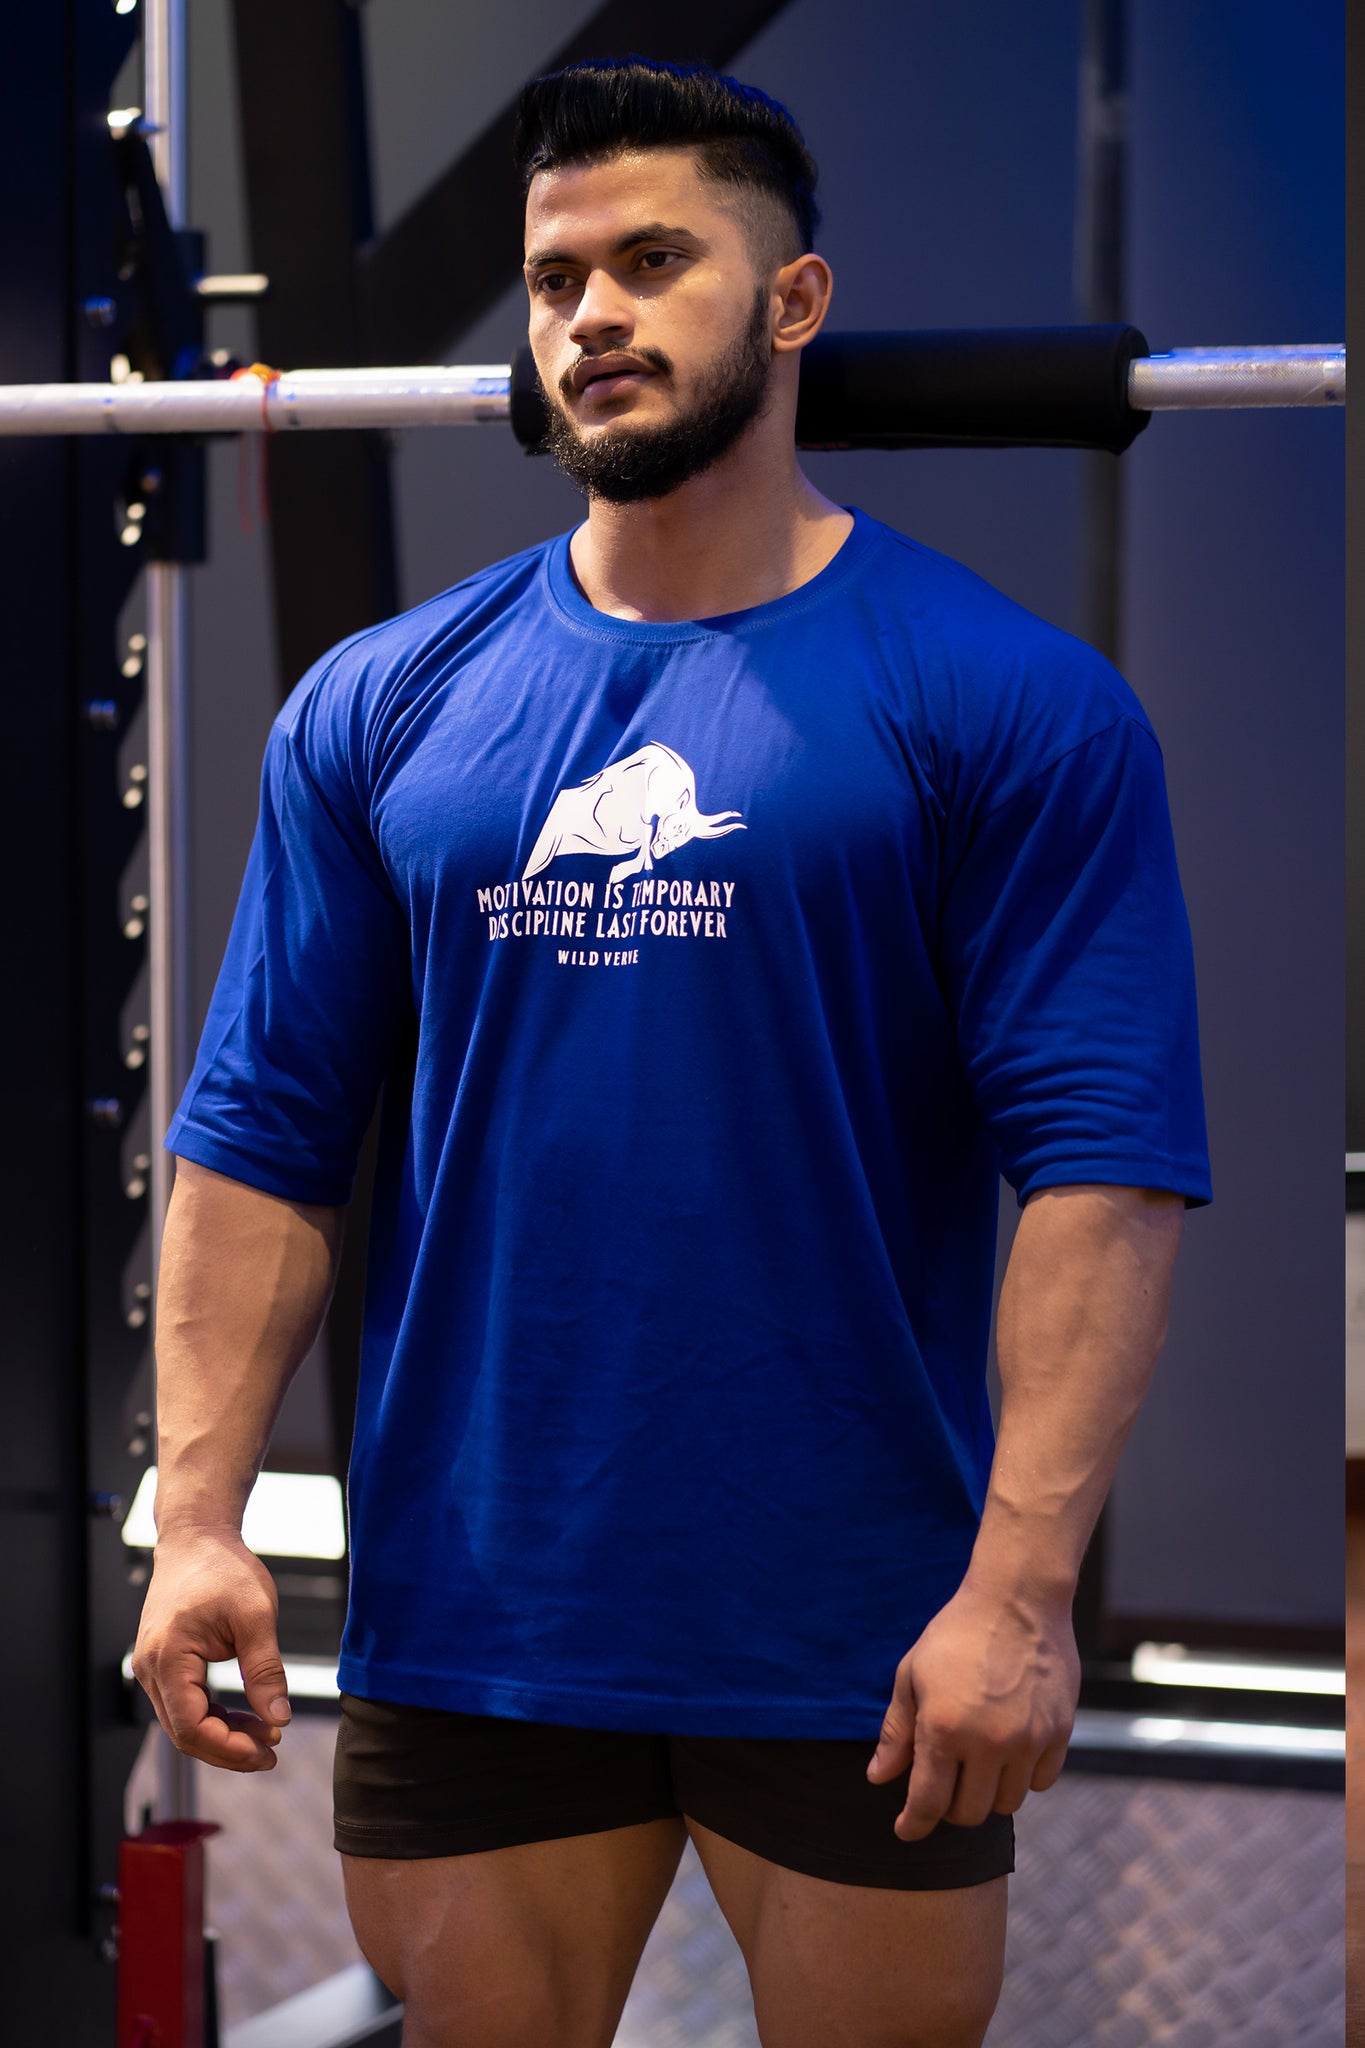 MOTIVATION IS TEMPORARY OVERSIZED T-SHIRT (Royal Blue)